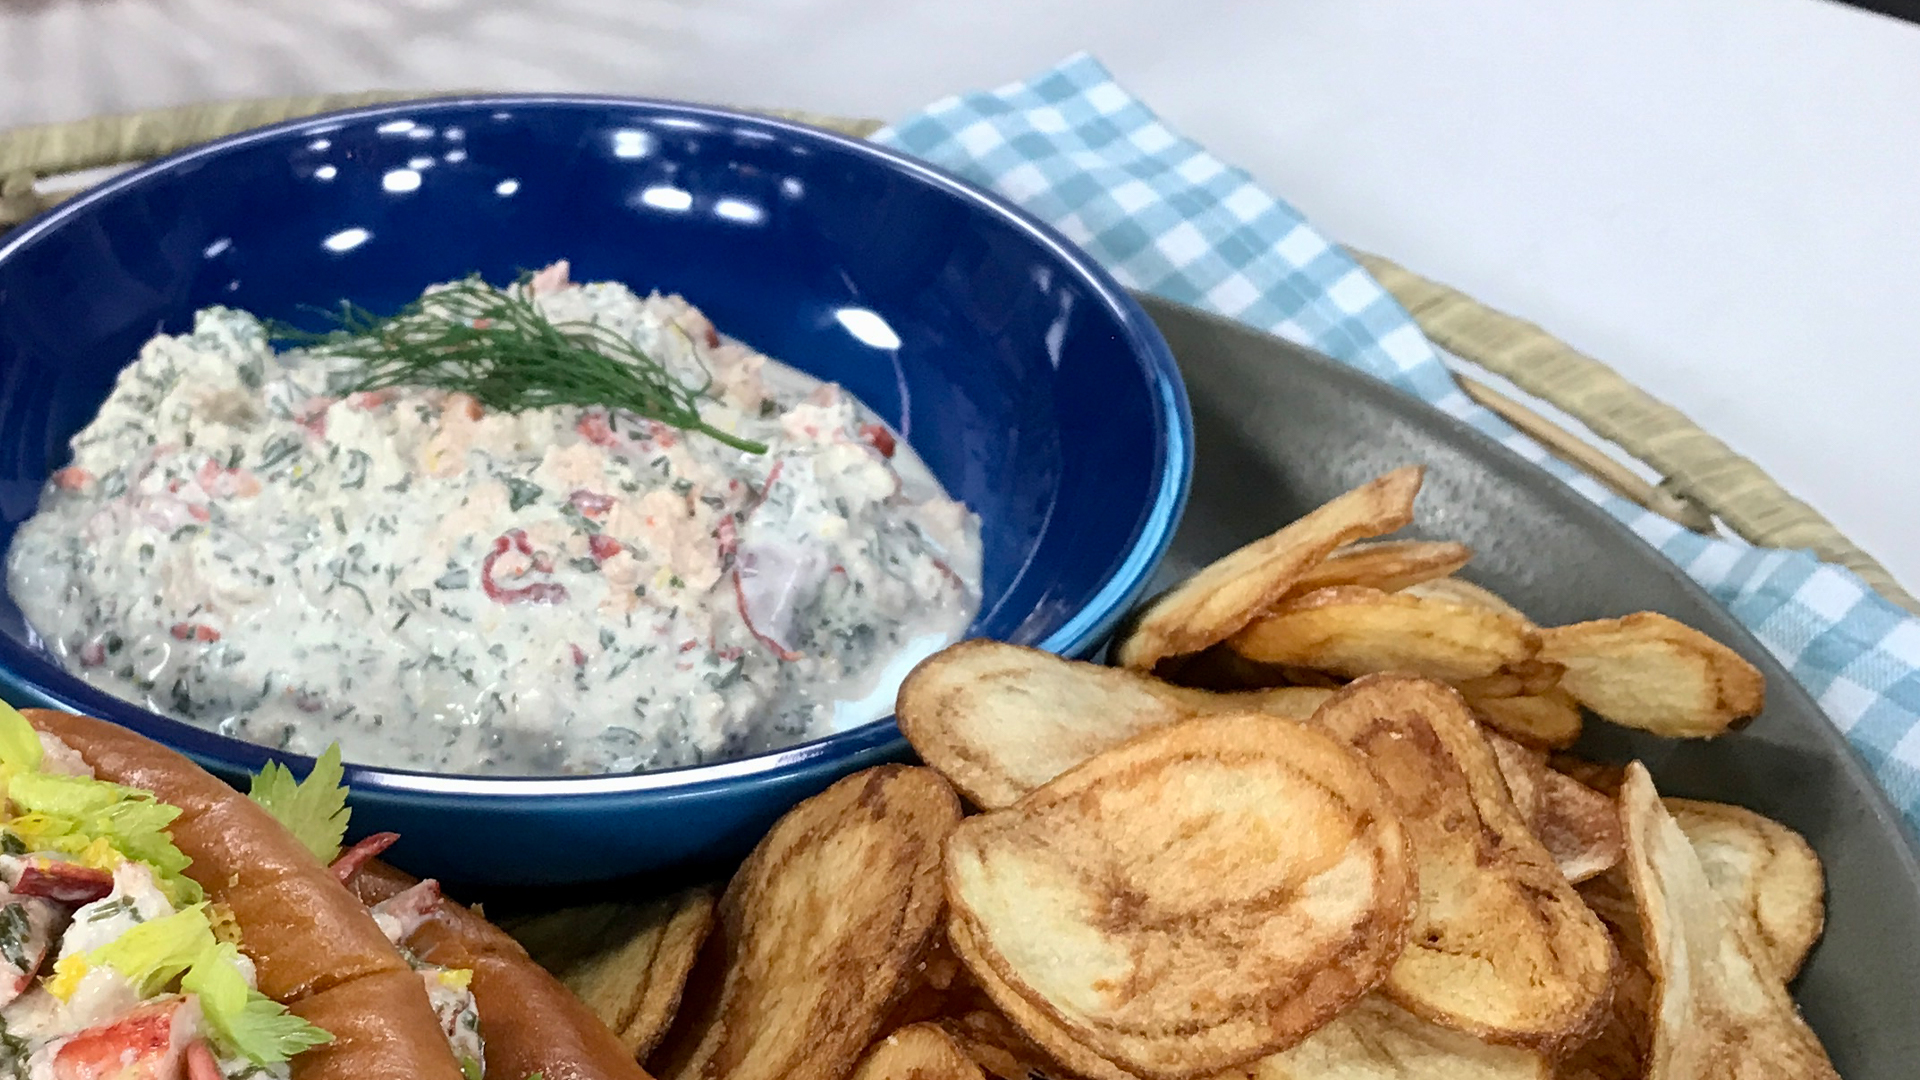 PEI potato chips with lobster dip